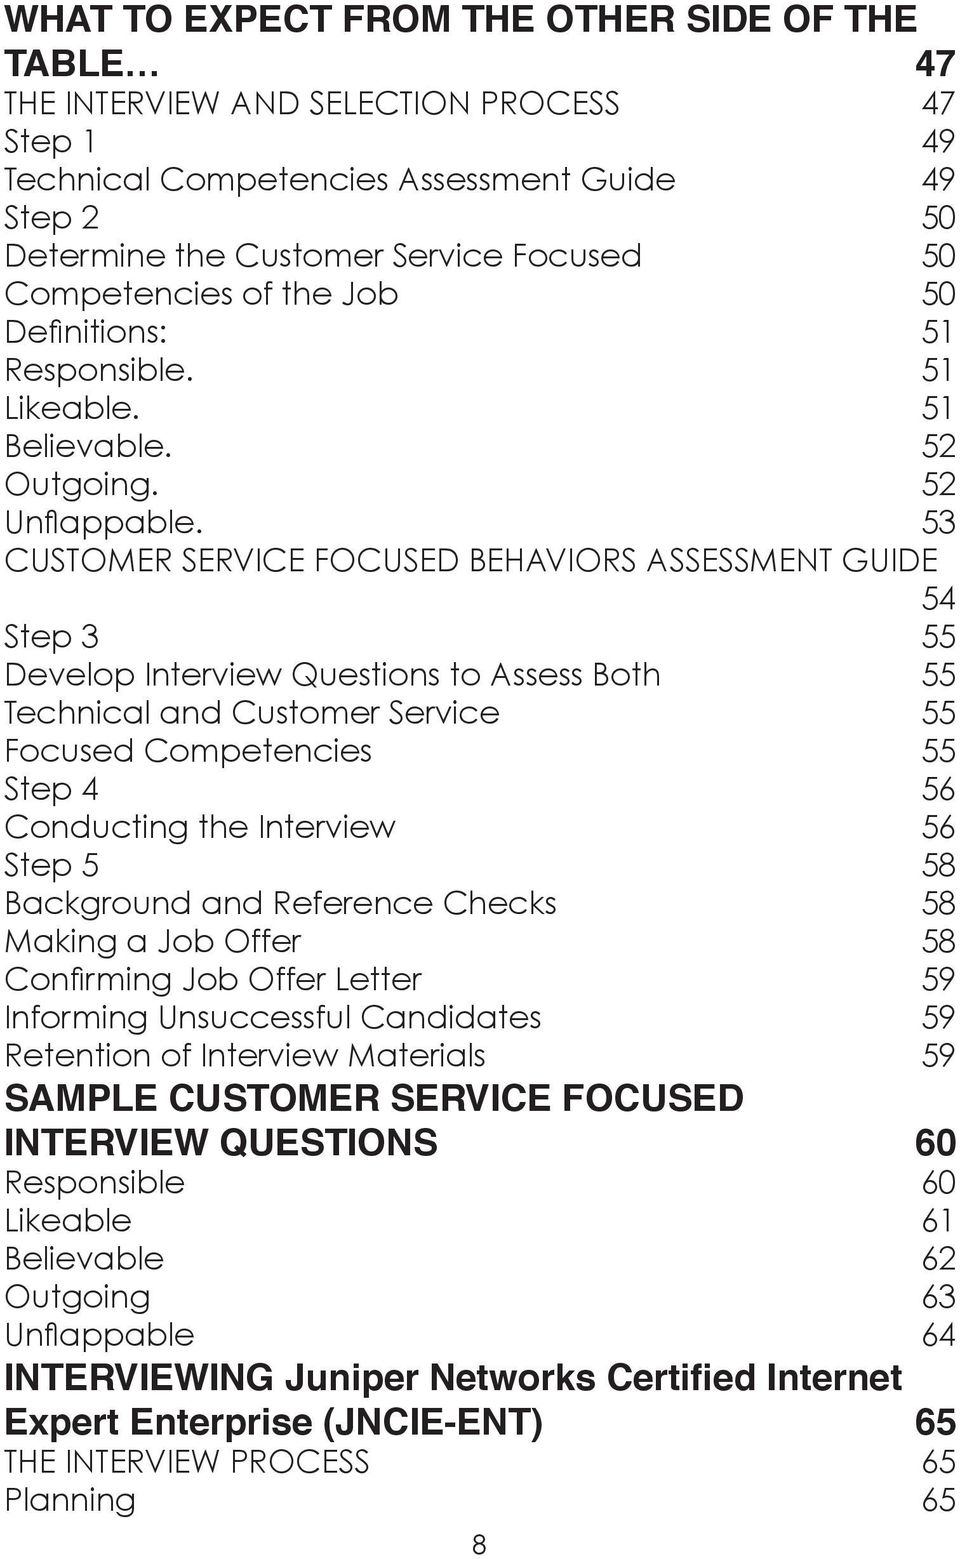 53 CUSTOMER SERVICE FOCUSED BEHAVIORS ASSESSMENT GUIDE 54 Step 3 55 Develop Interview Questions to Assess Both 55 Technical and Customer Service 55 Focused Competencies 55 Step 4 56 Conducting the